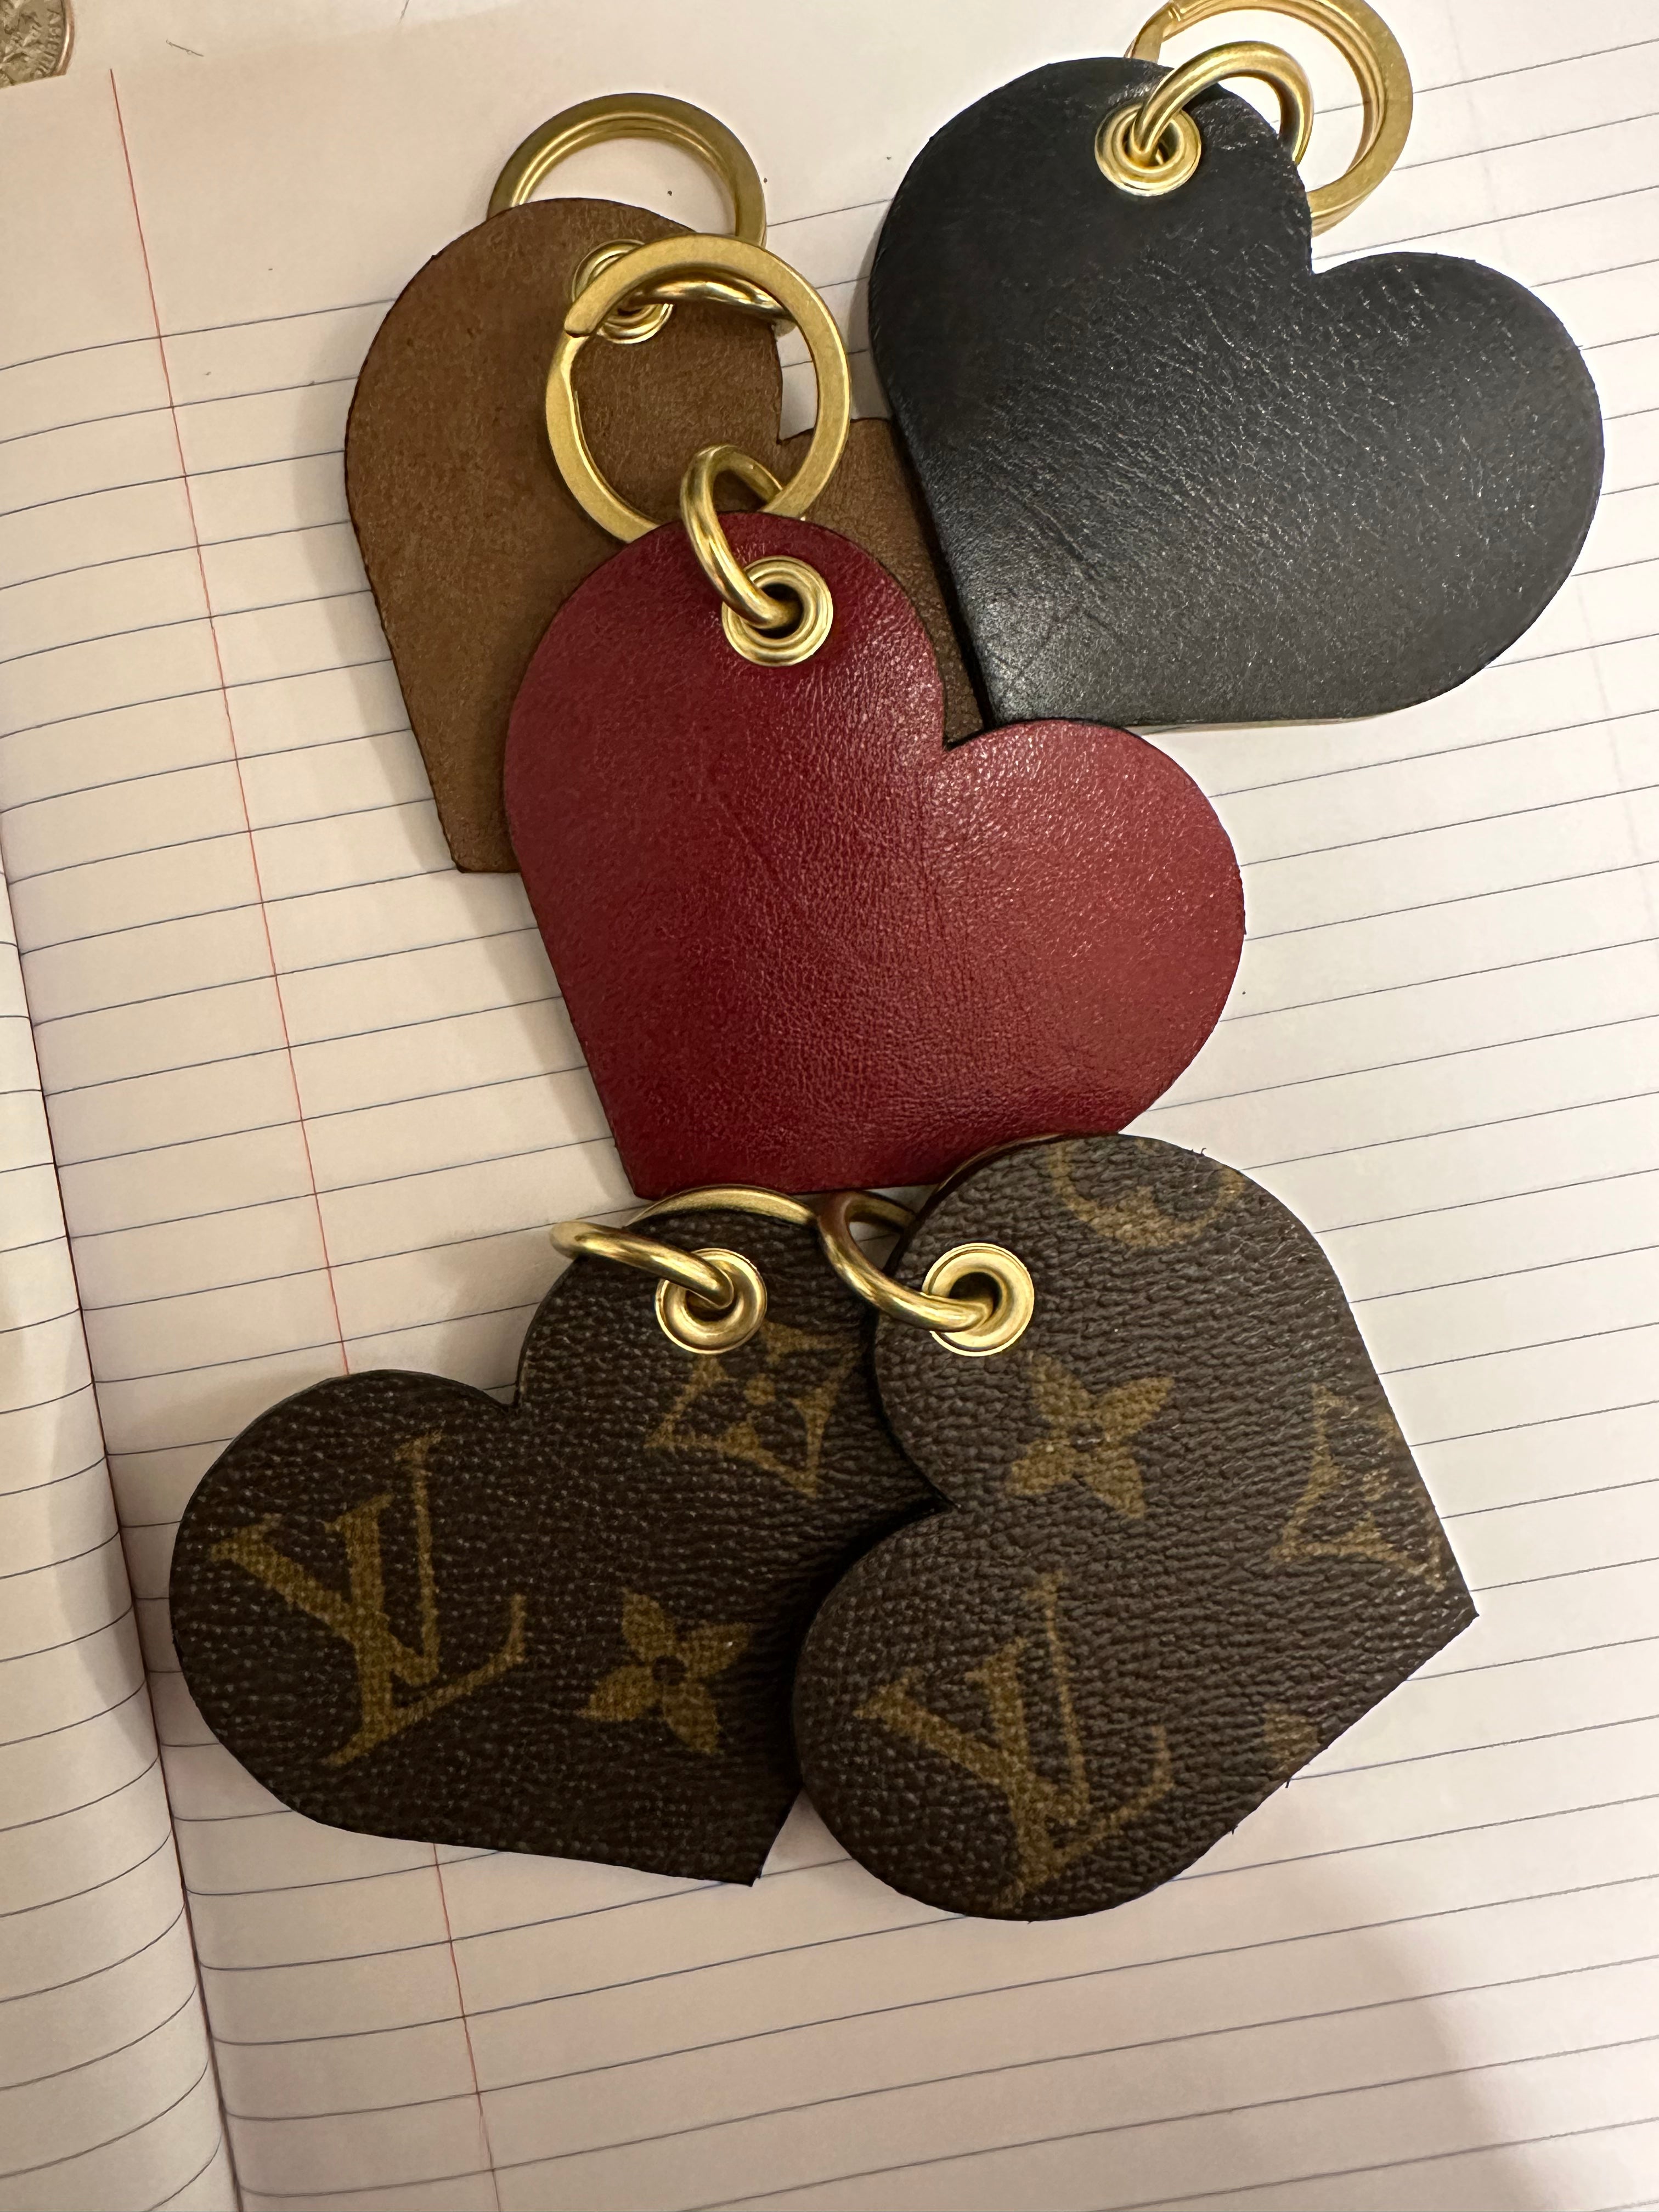 Other, Pink Lv Heart Keychain